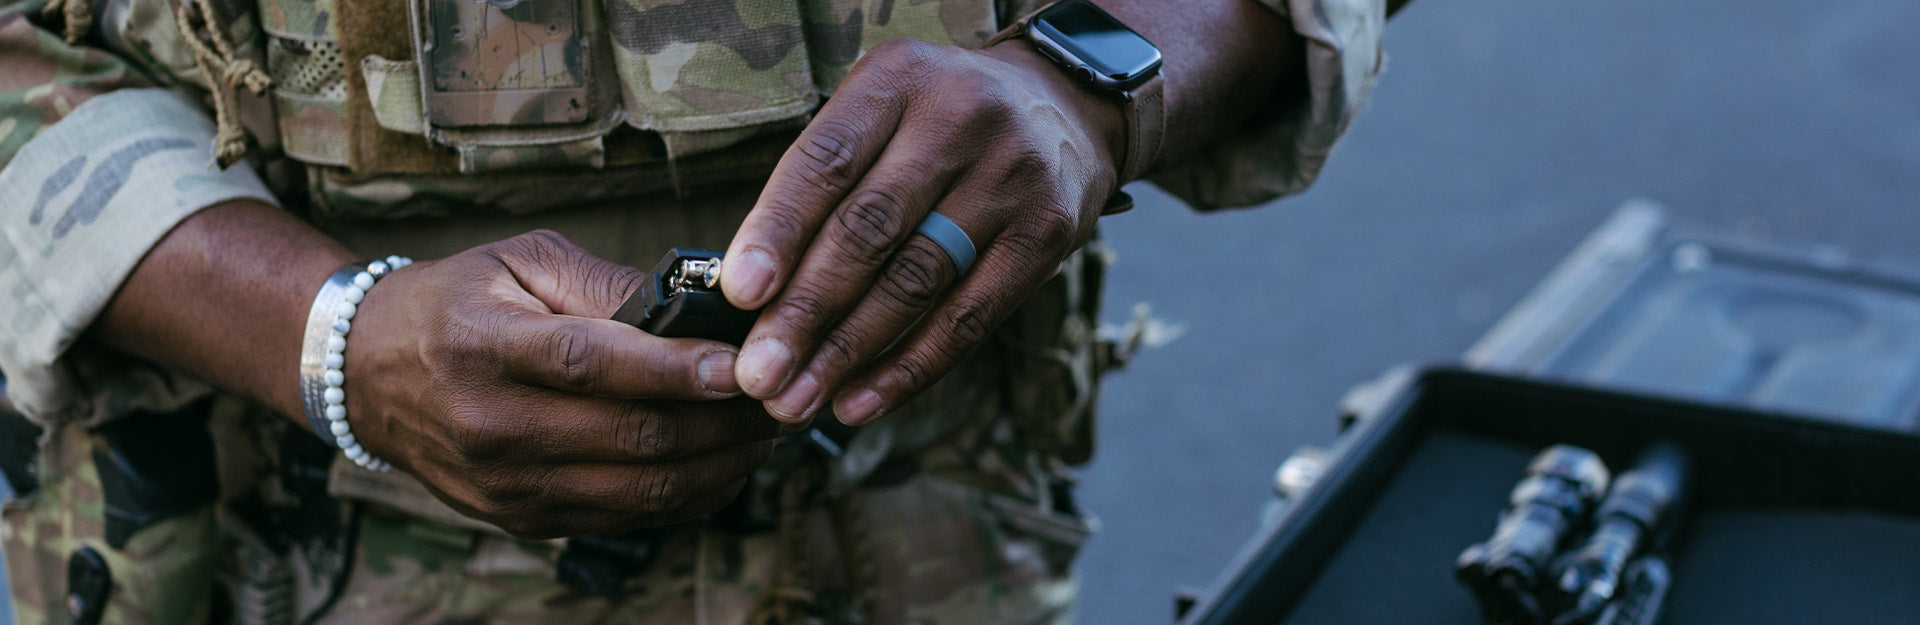 U.S. Army Ranger - Black Military.Silver Couple Wedding Bands Carbon Fiber  Shop Sale Forever Love Promise Jewelry | Tungsten Rings | Tungsten Jewelery